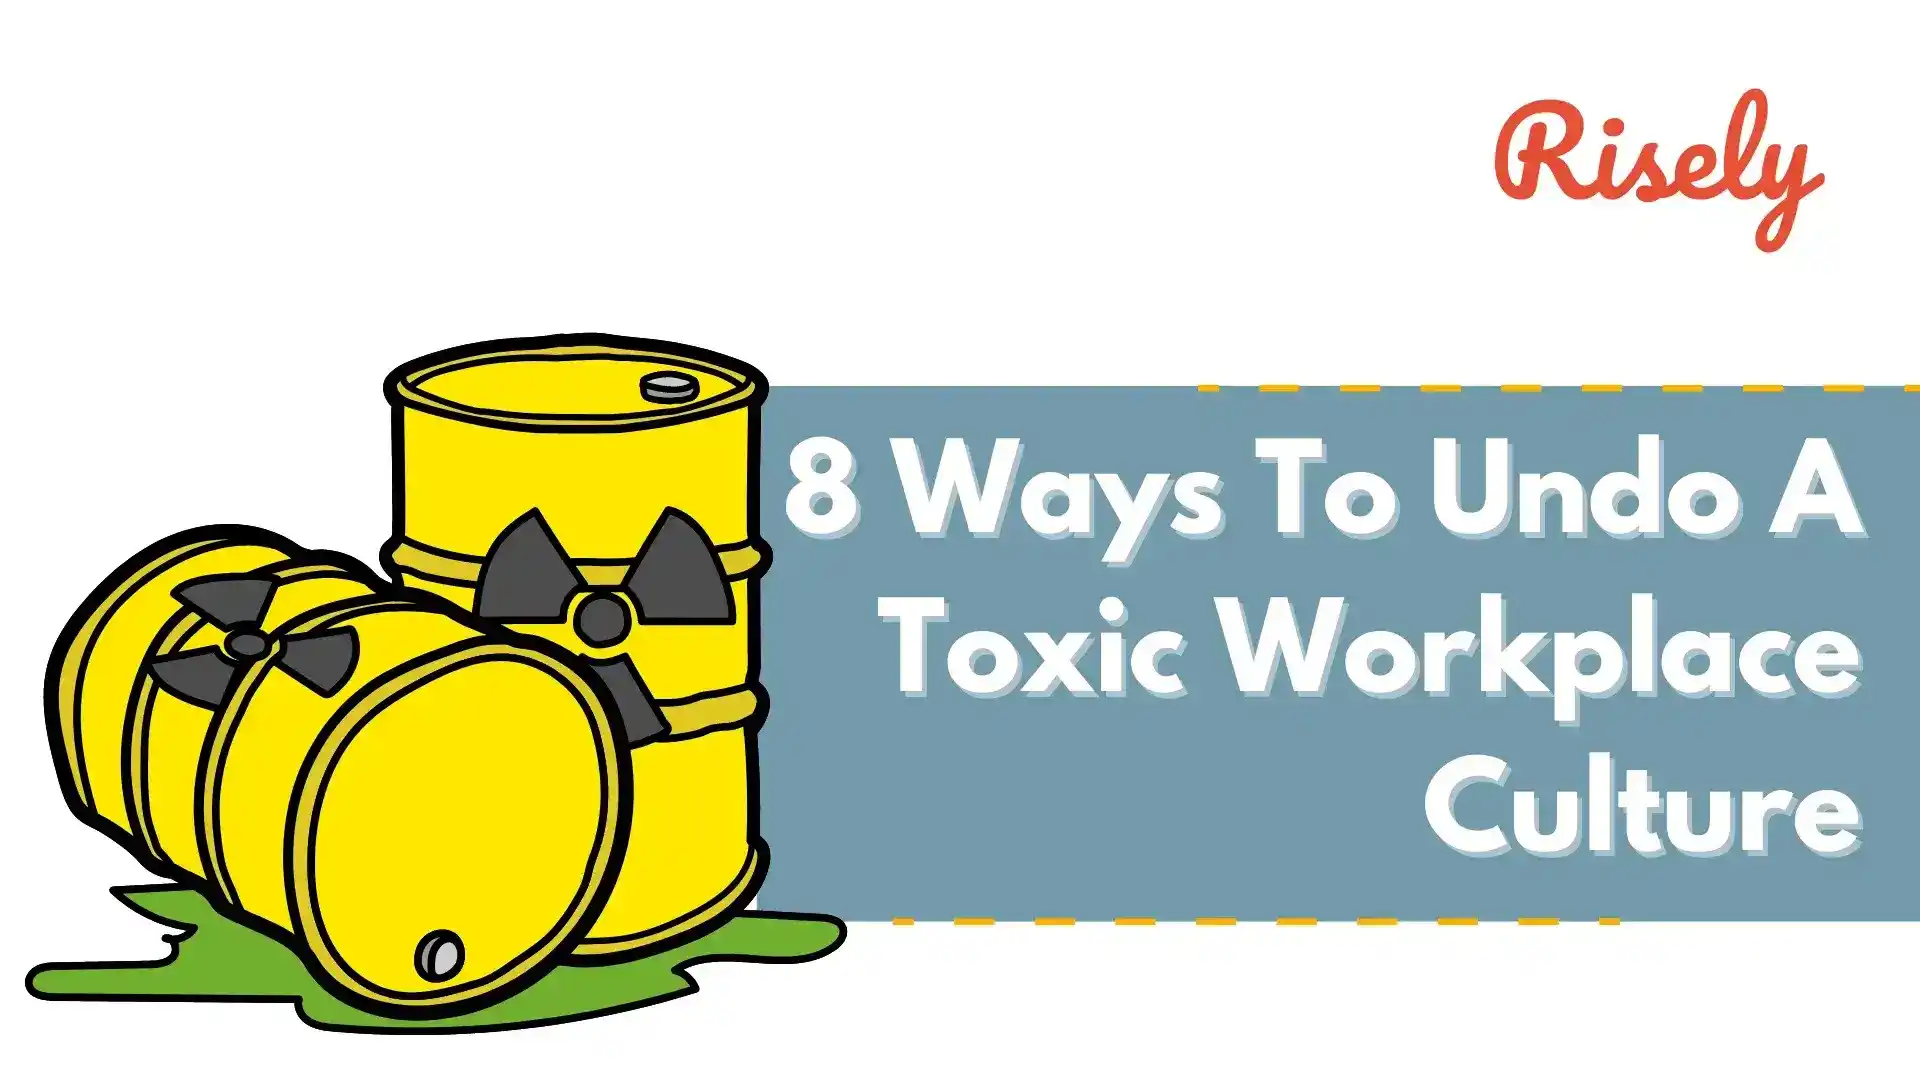 Toxic Workplace Culture